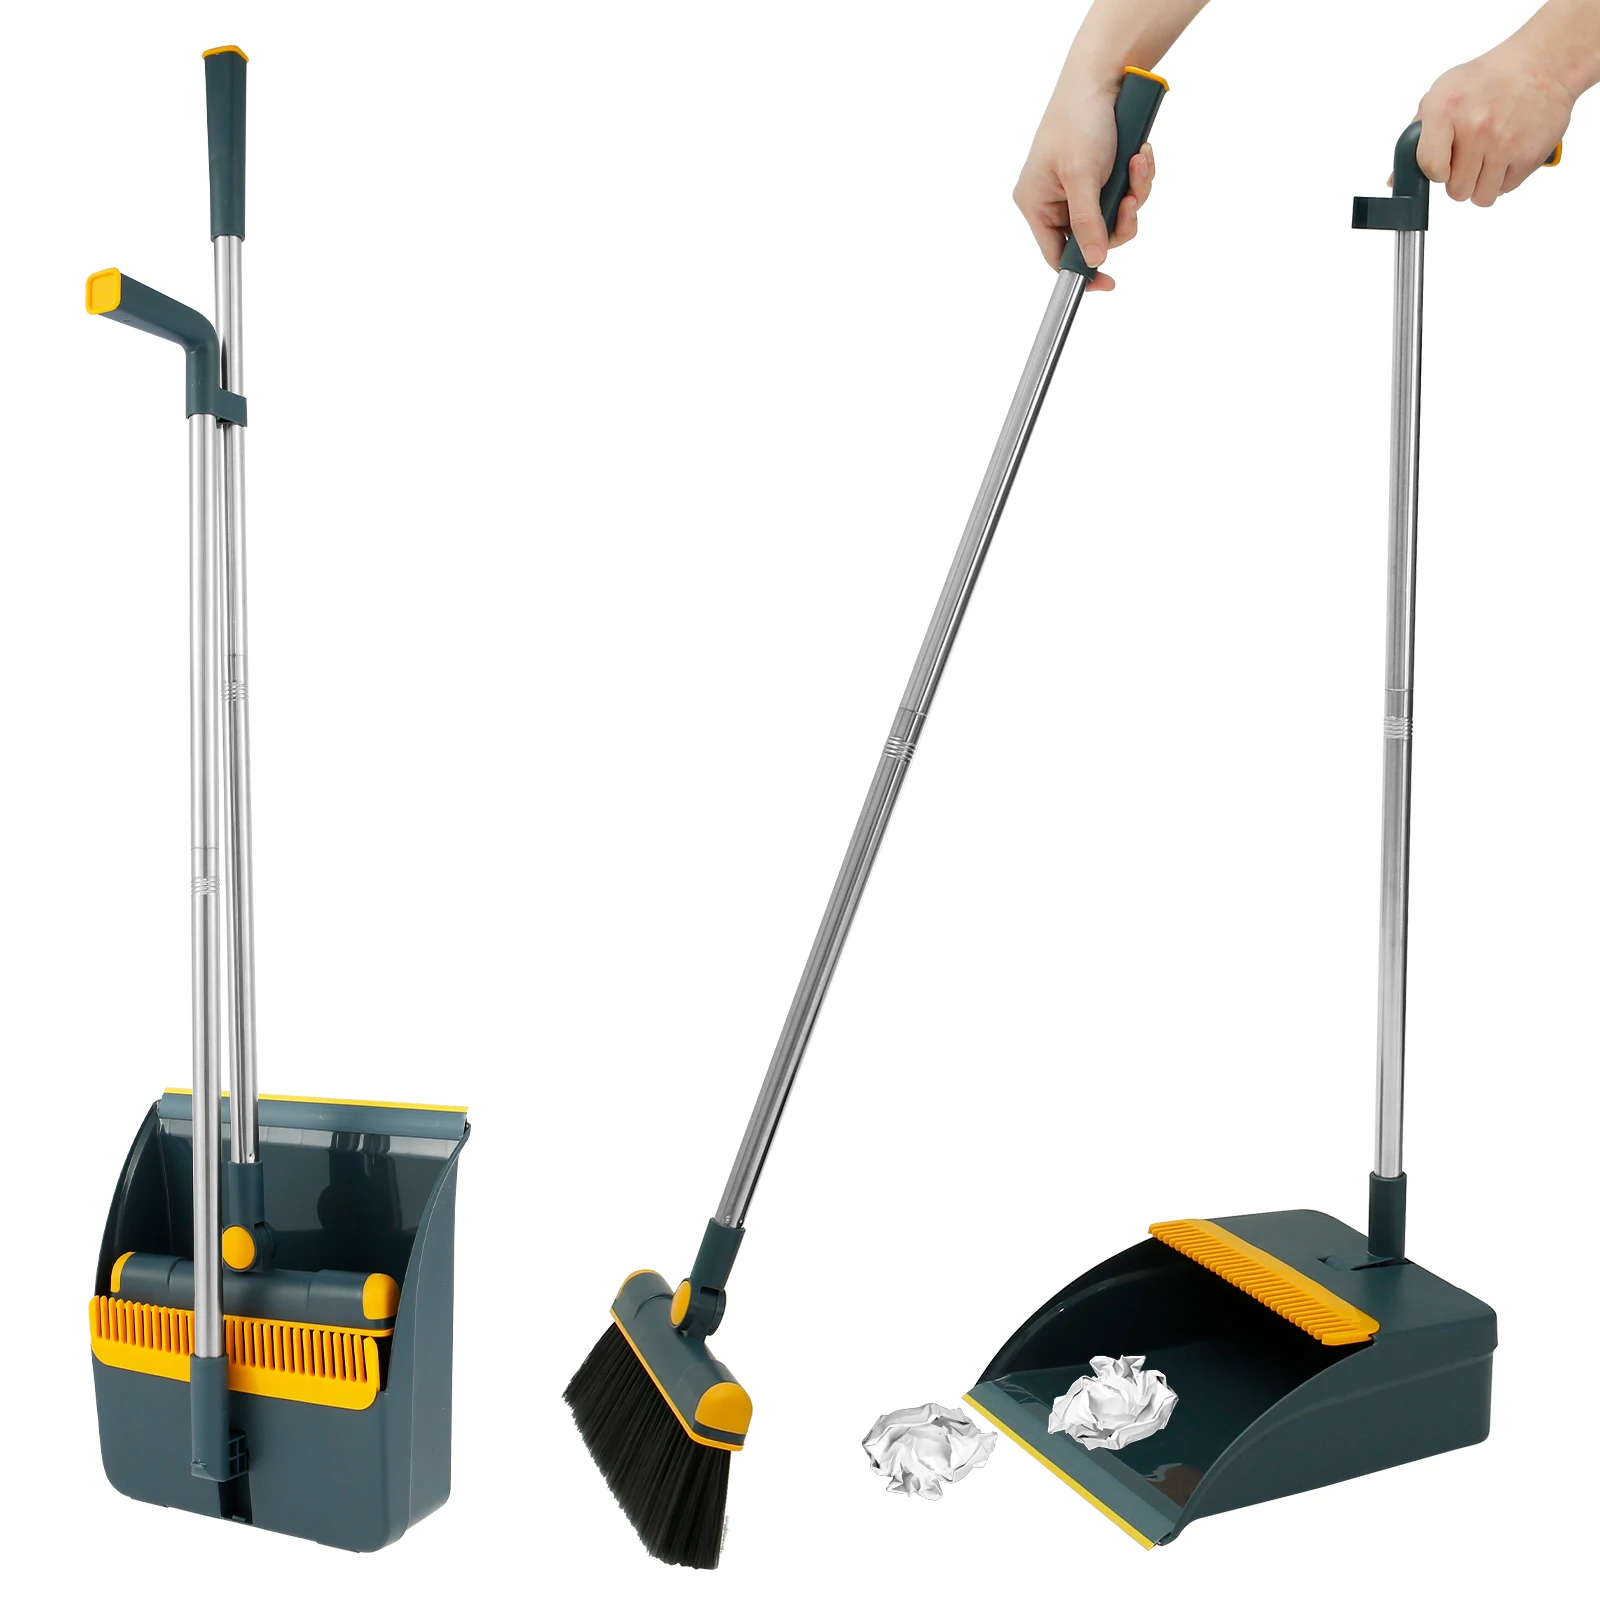 

Long Handled Dustpan and Broom Set 180° Rotatable Standing Dustpan and Brush Portable Dustpan Combo Set with Scraper Teeth